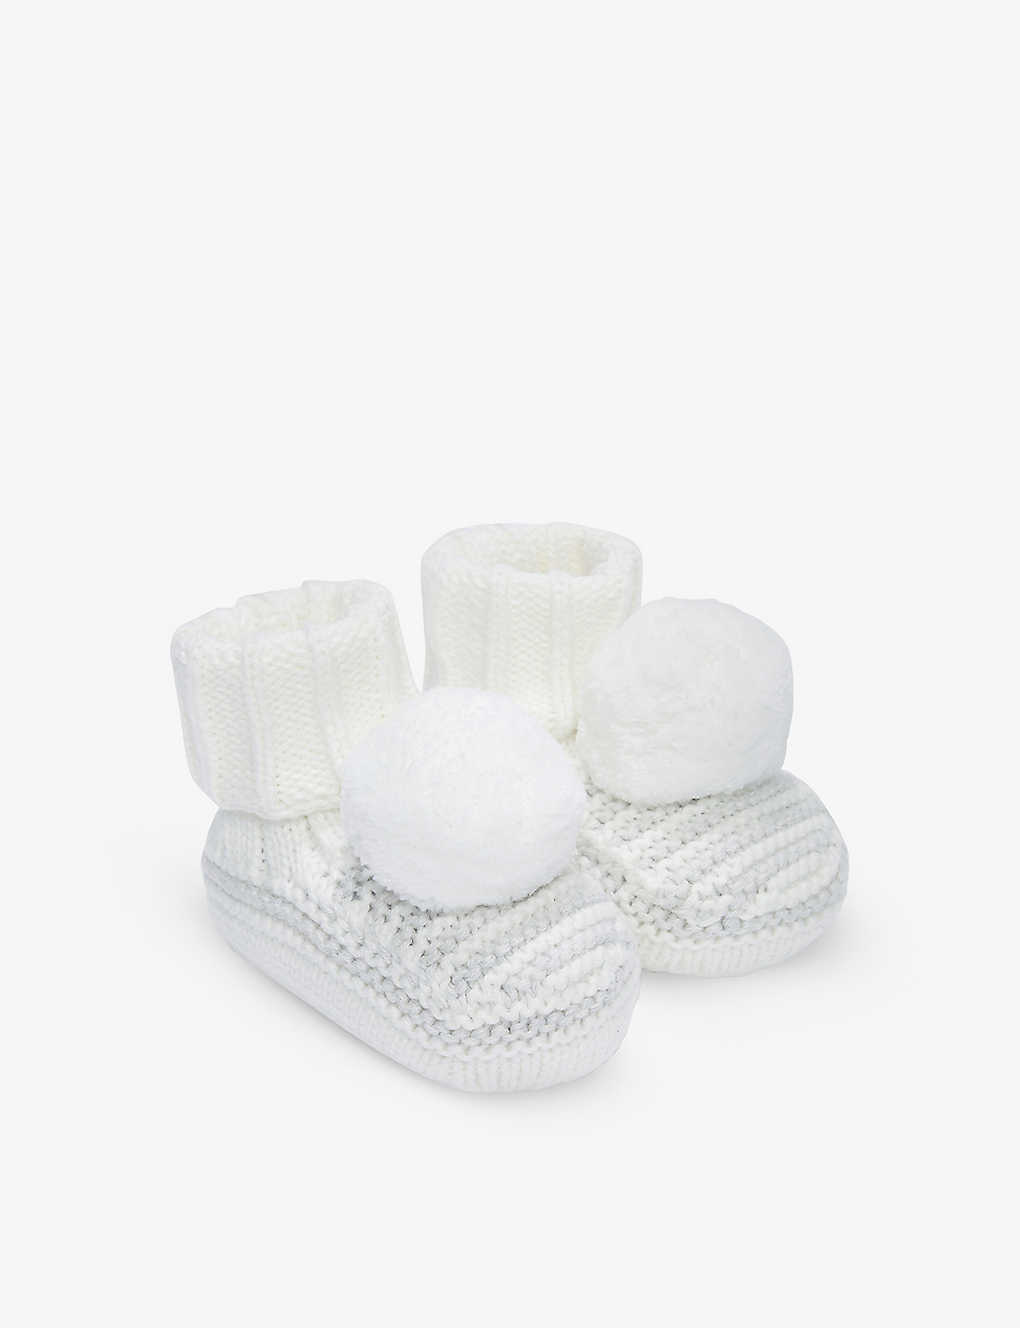 The Little White Company Babies'  Grey/white Pom-pom Embellished Knitted Organic-cotton Crib Shoes 0–12 Month